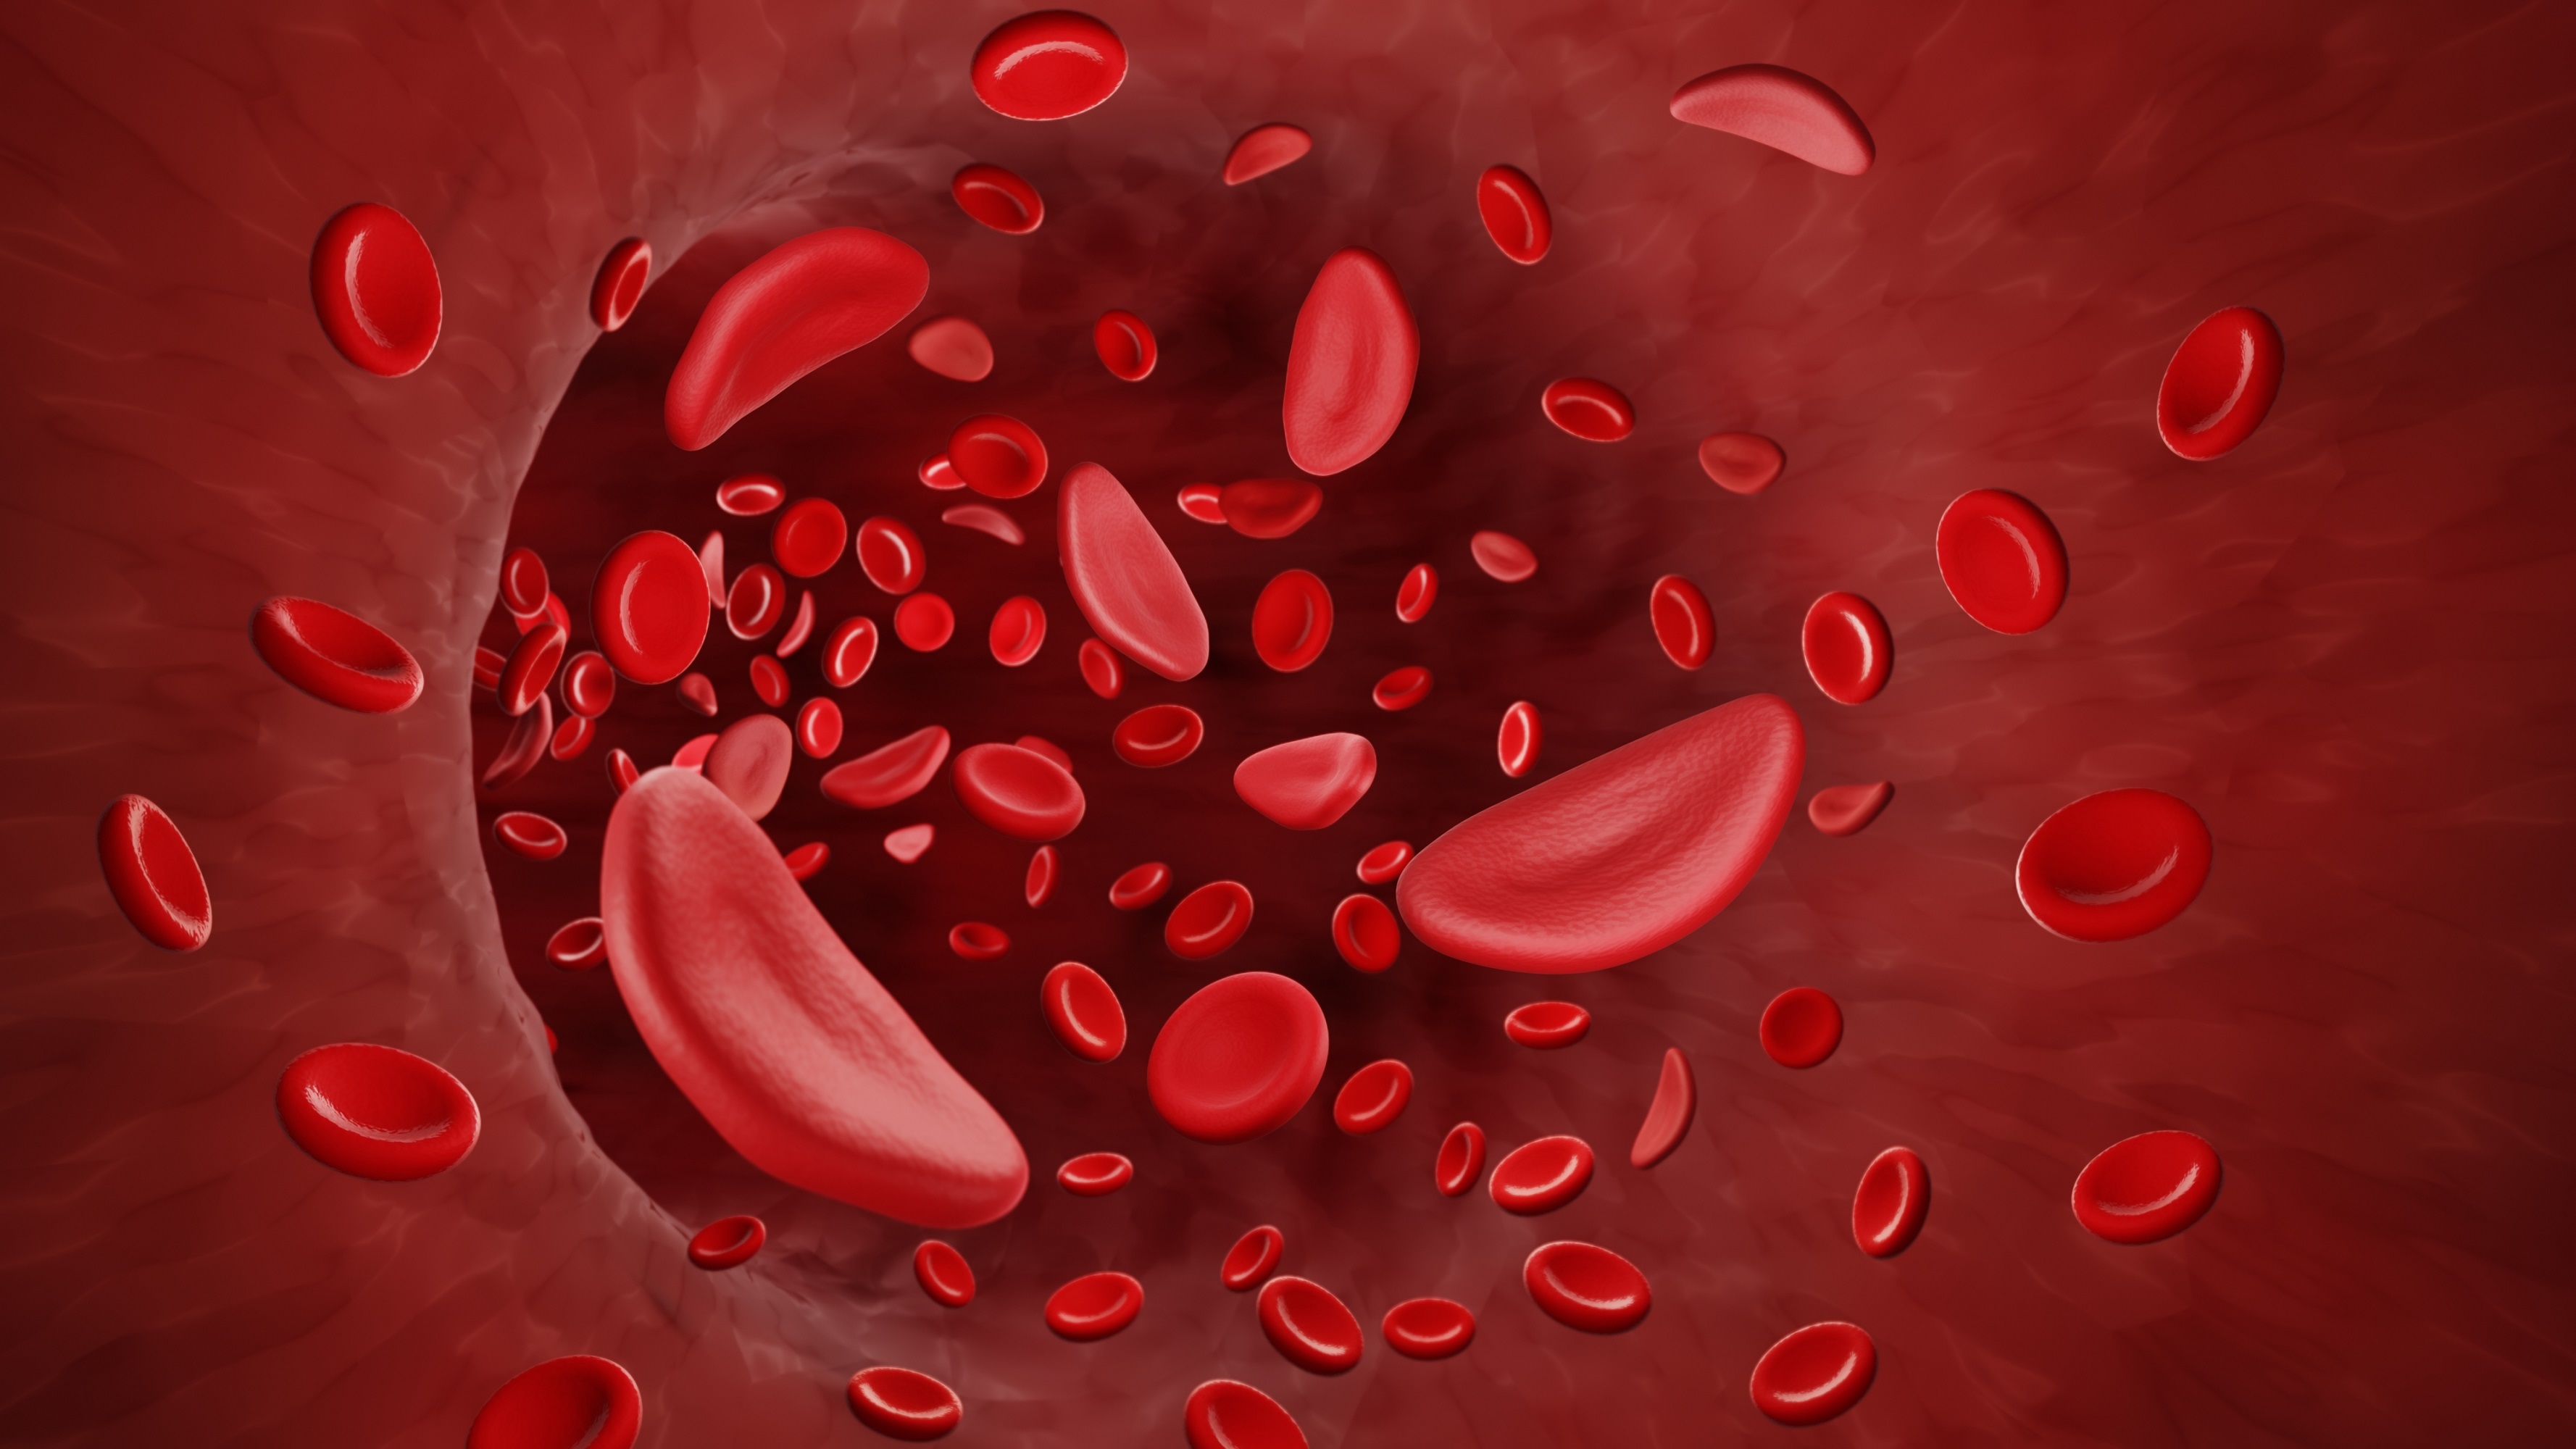 New Curative Treatment for Sickle Cell Disease